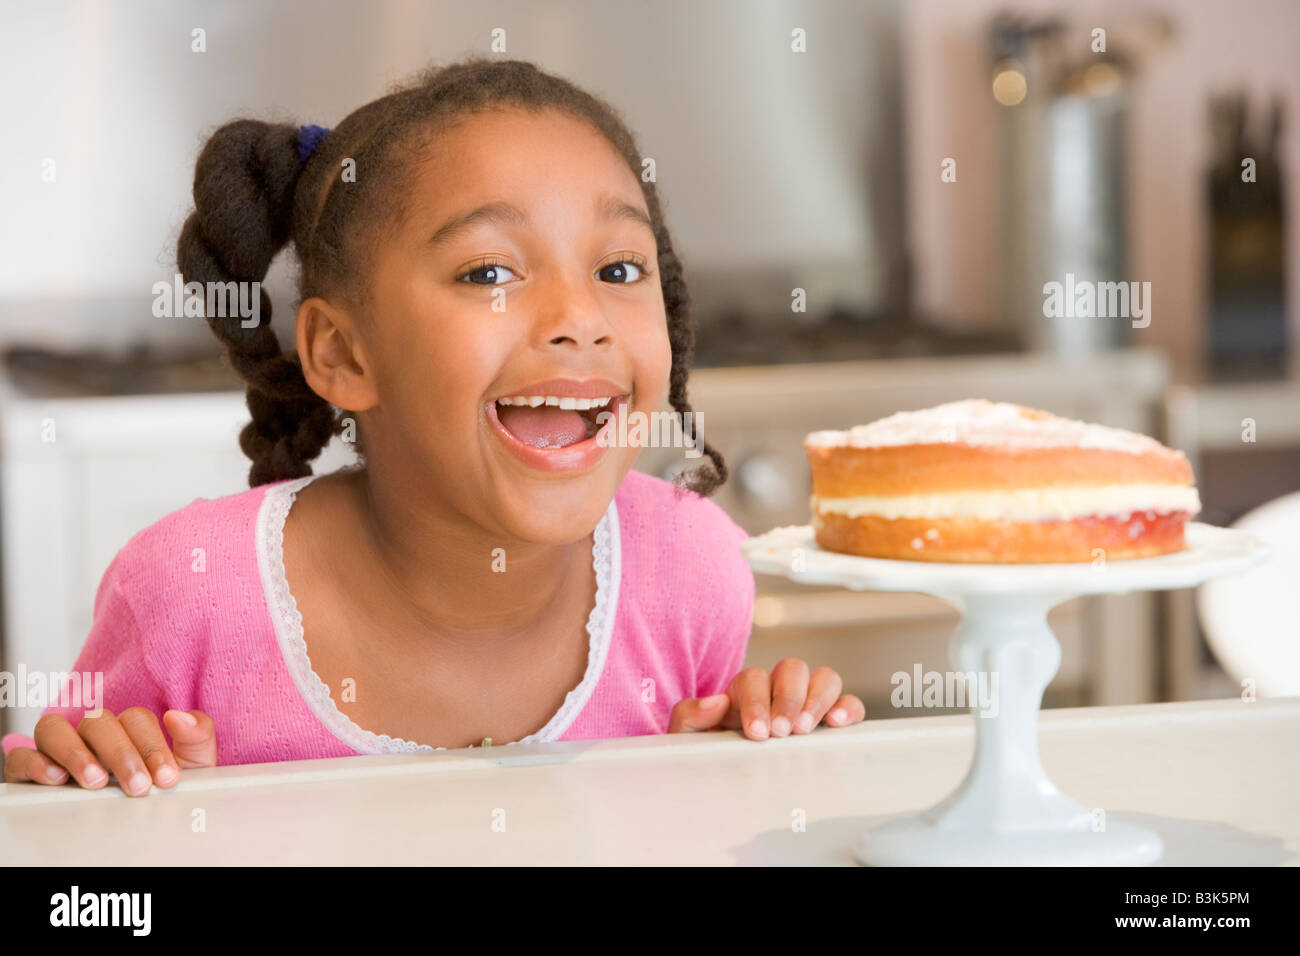 Young girl in kitchen looking at cake on counter smiling Stock Photo